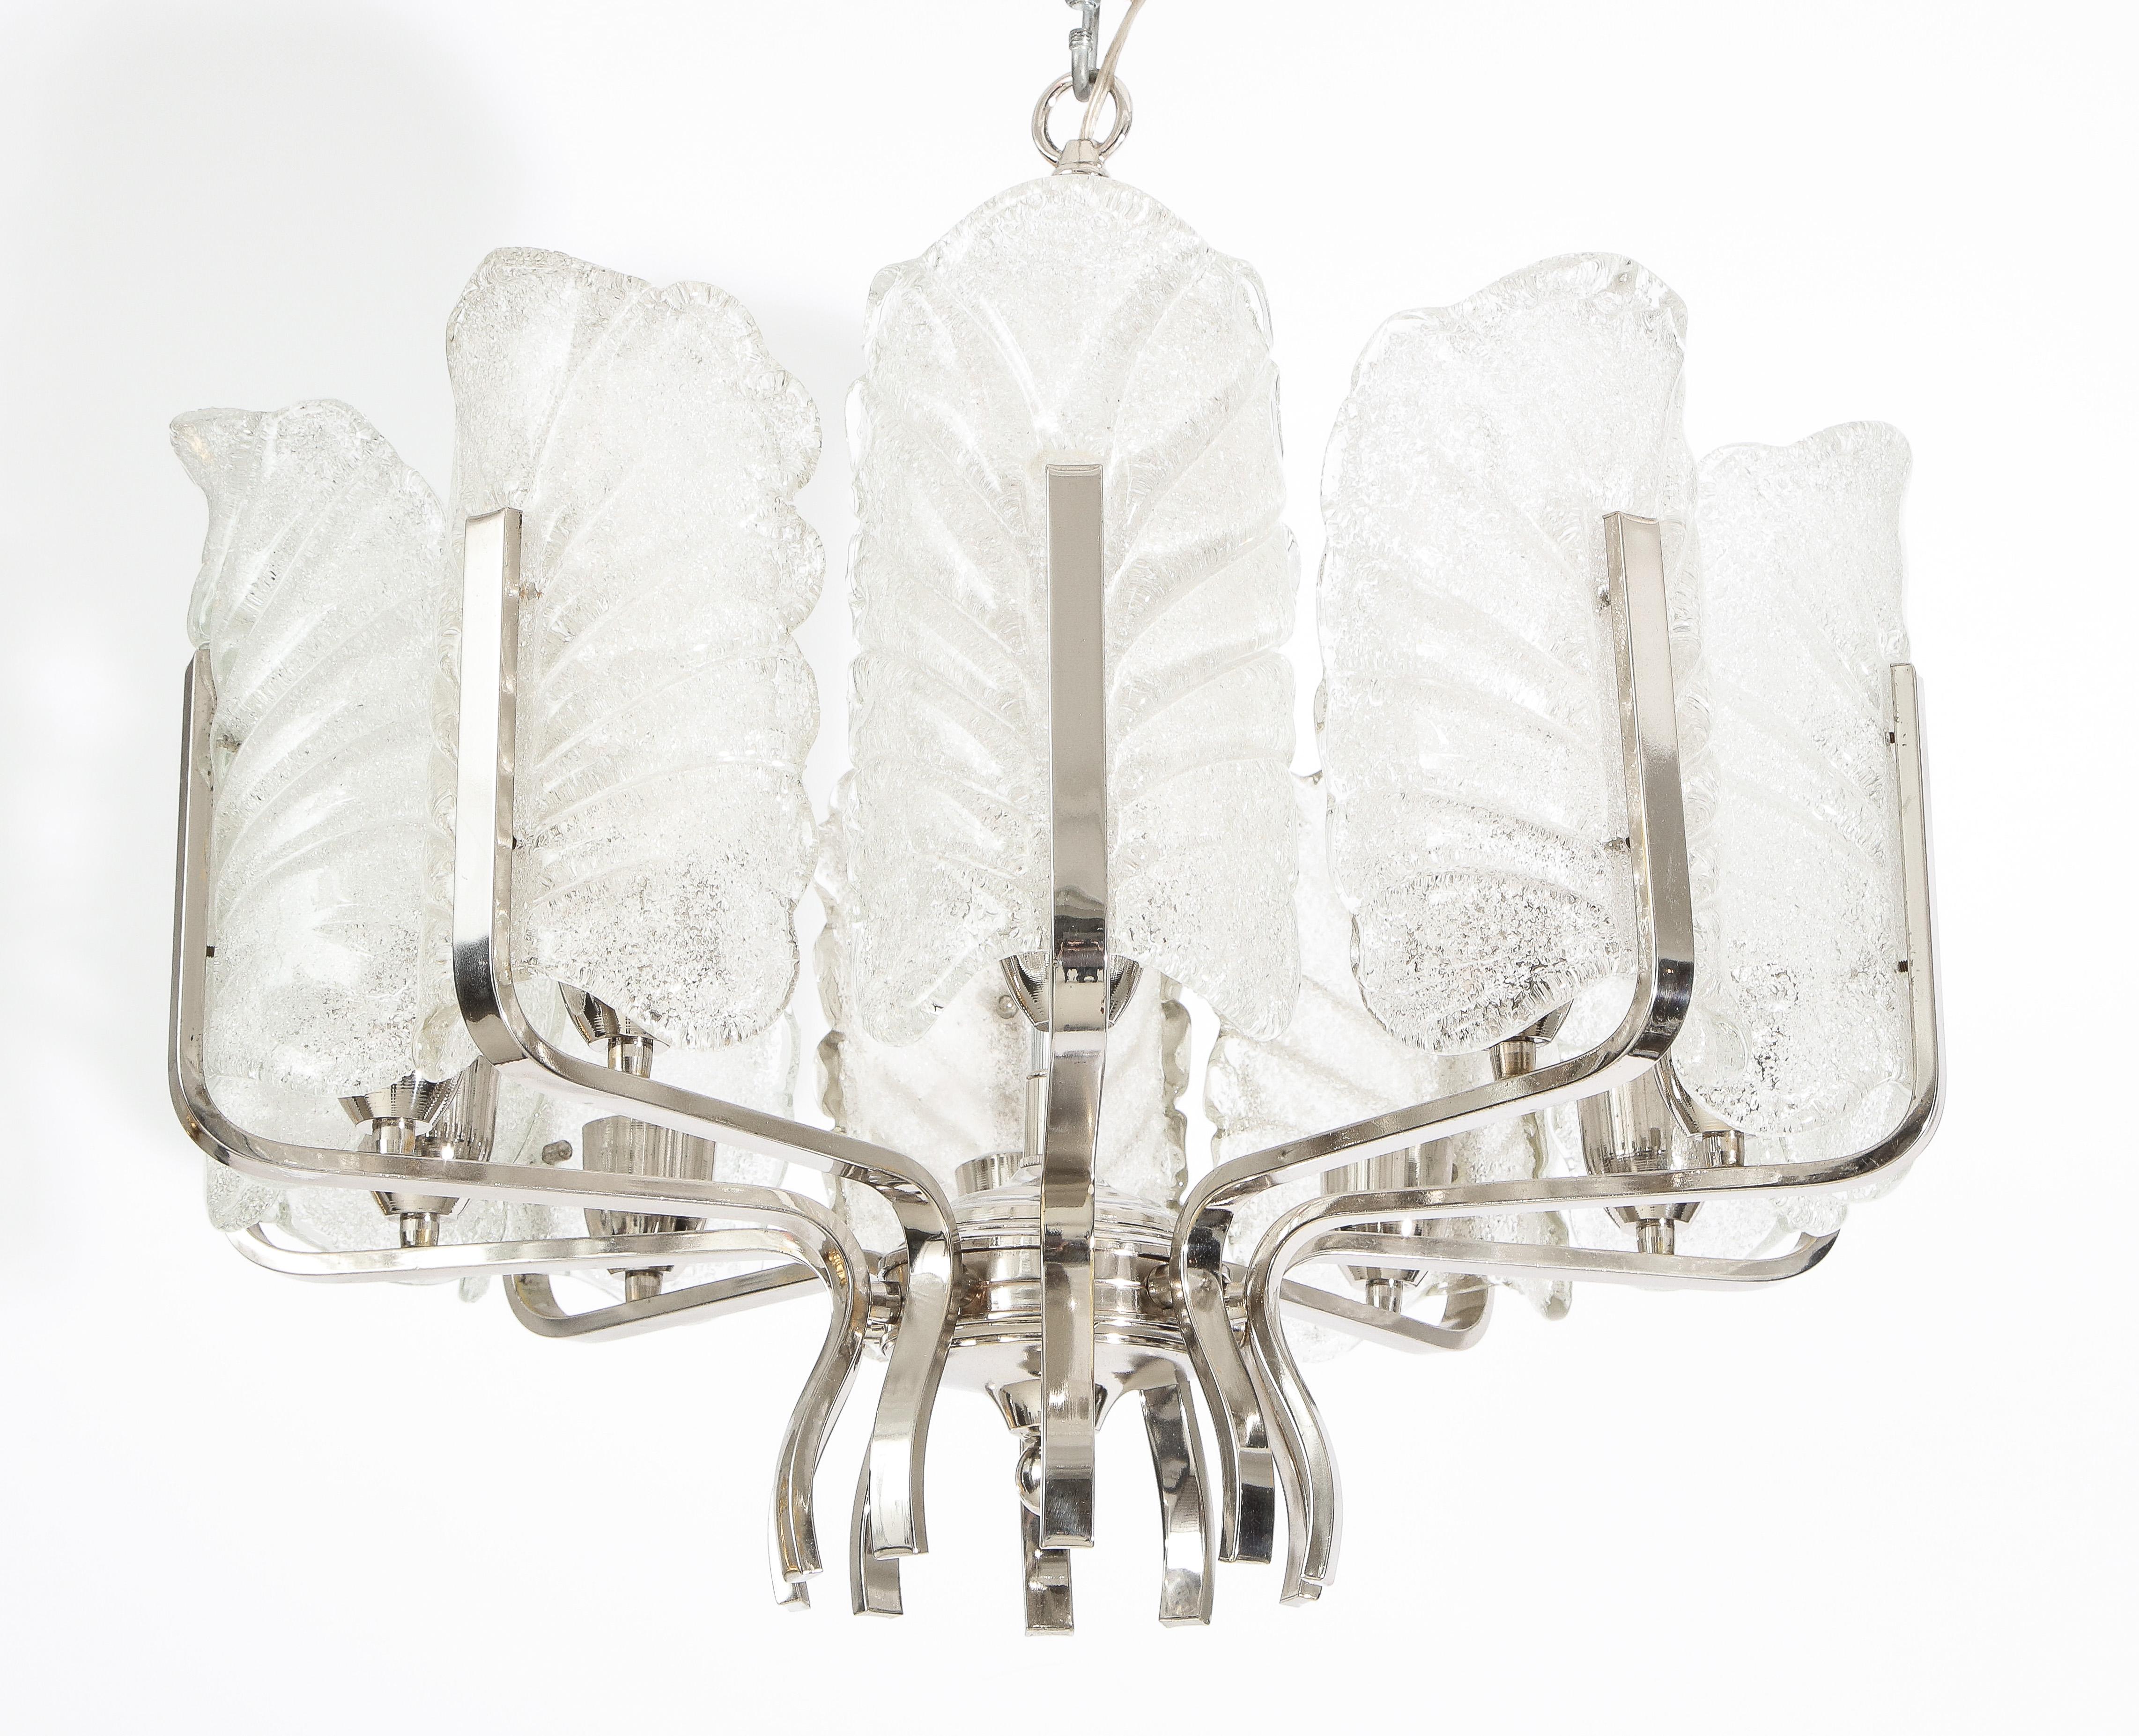 Elegant Murano glass leaf chandelier.
The polished chrome frame supports ten textured frosted Murano glass leaves each illuminated
by there own light source which have been newly rewired for the US with standard size light sockets.
Maximum 25